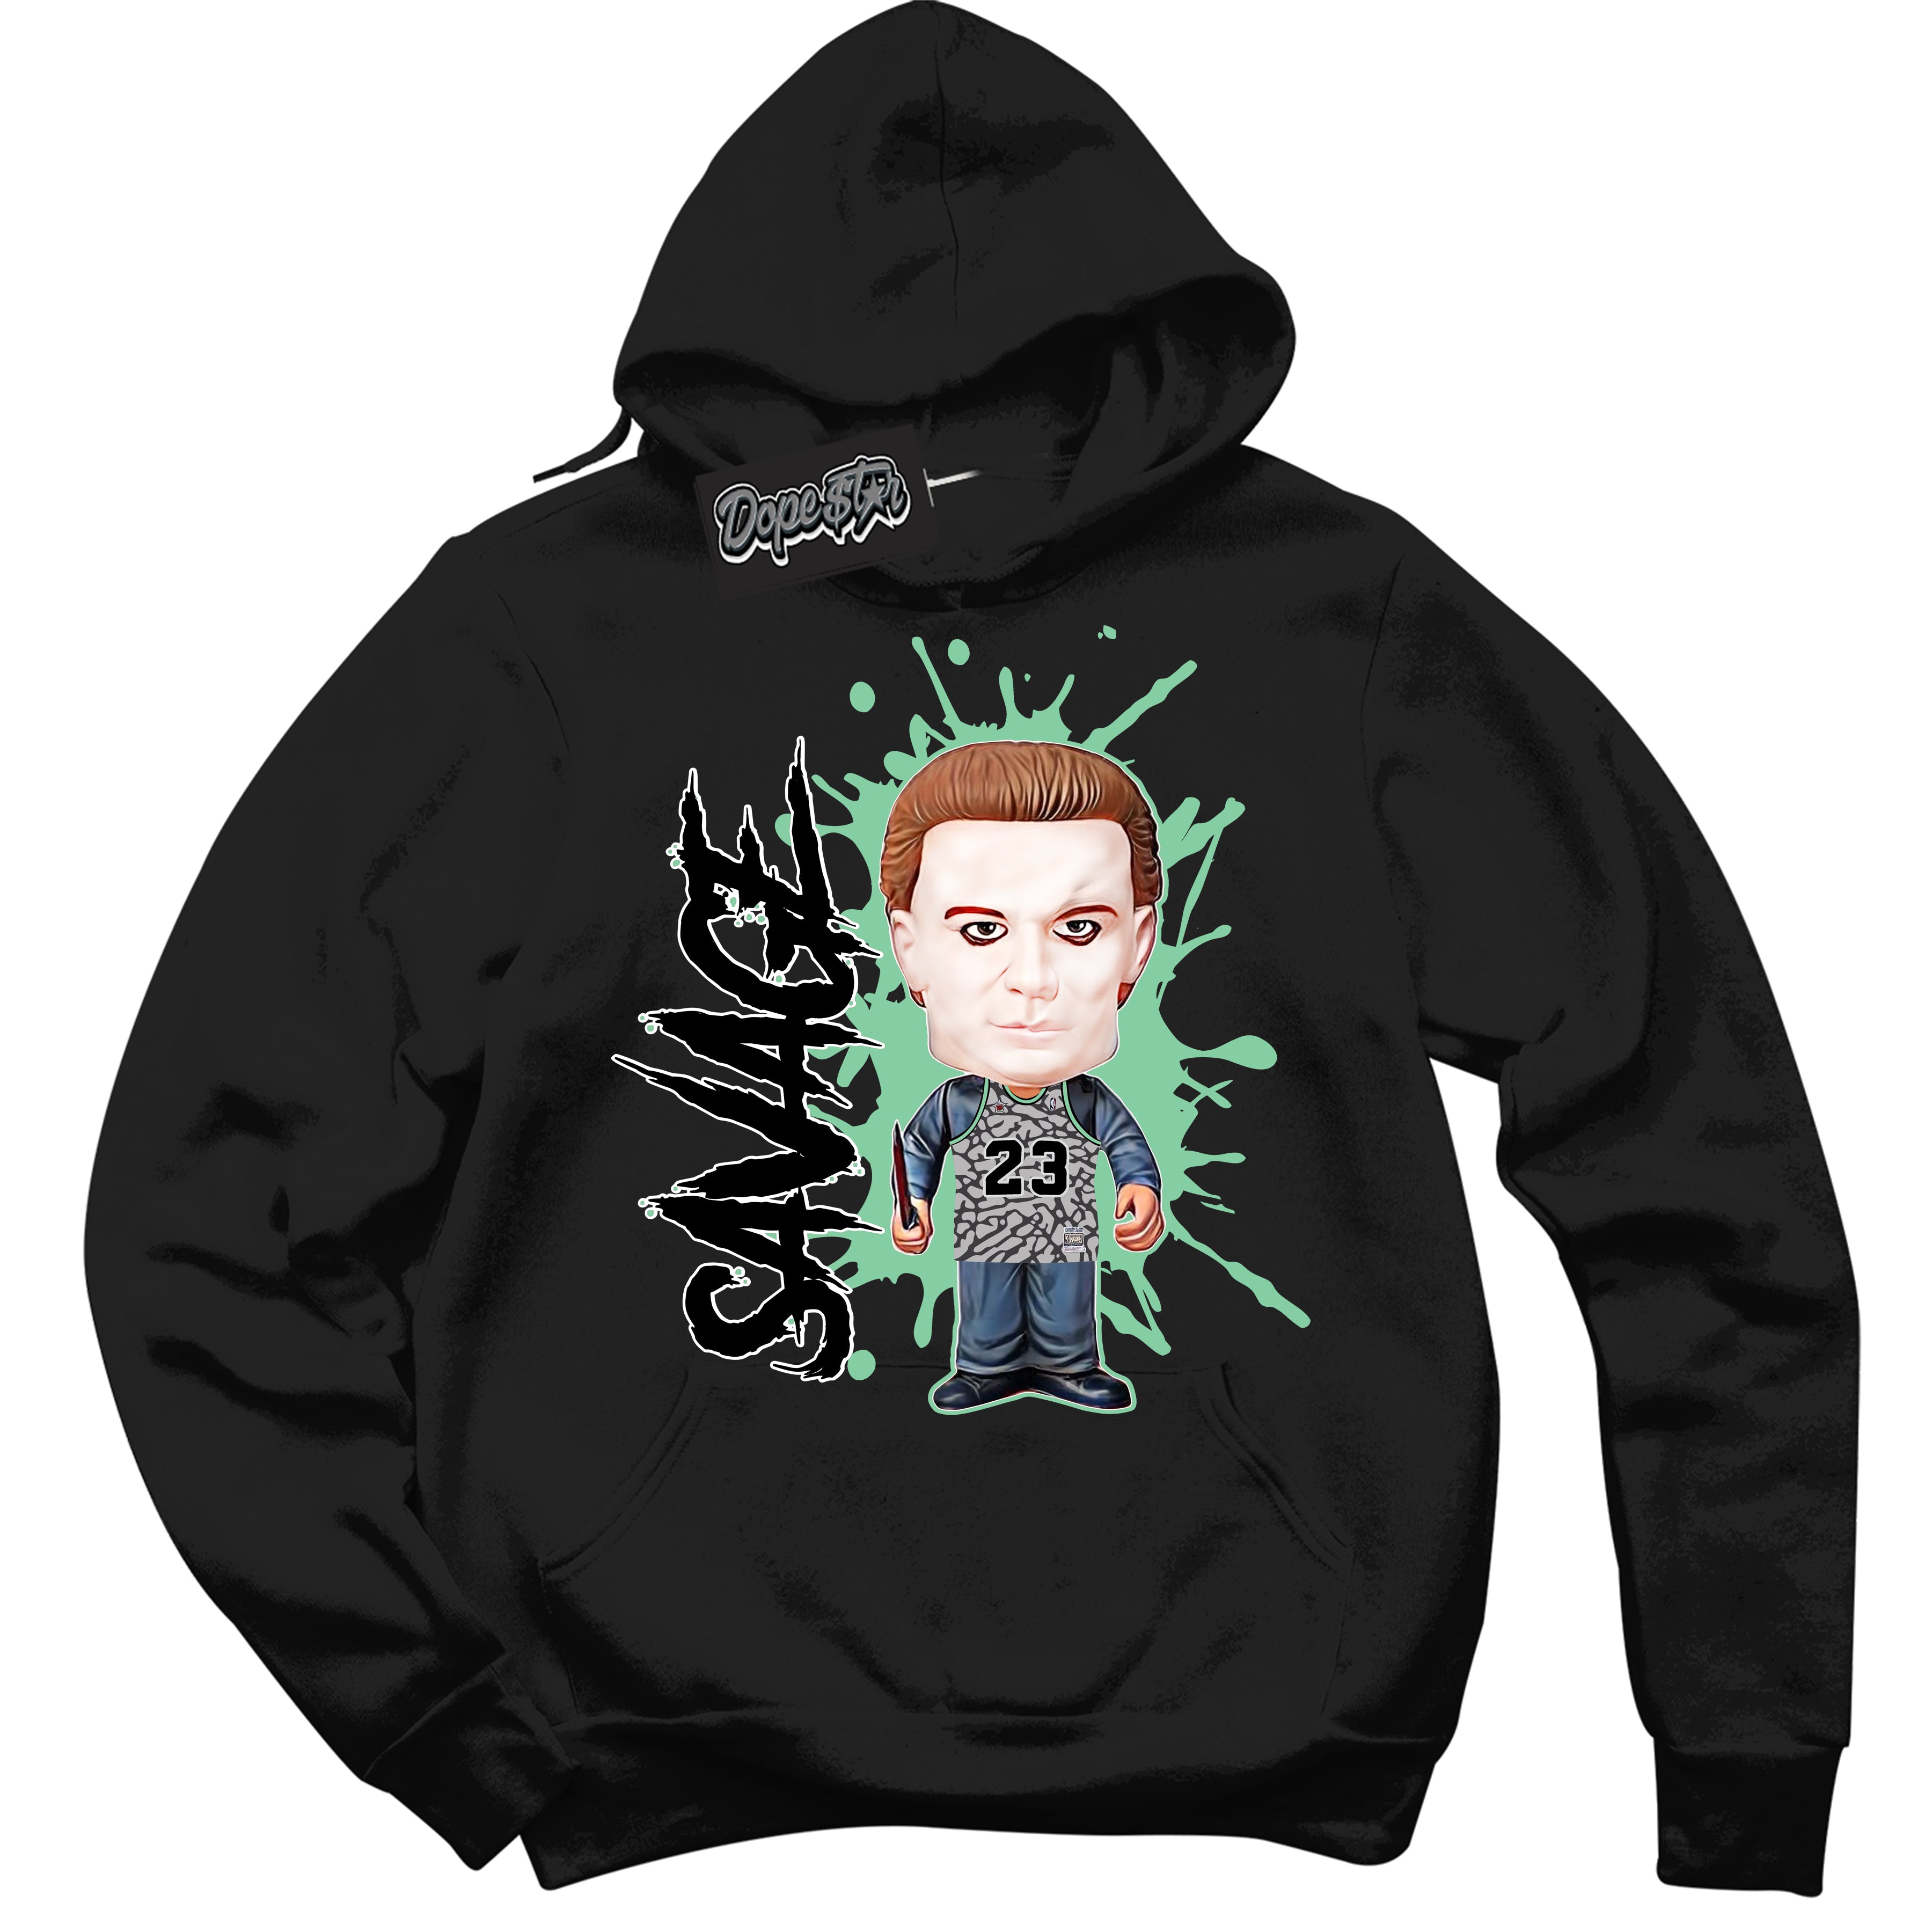 Cool Black Graphic DopeStar Hoodie with “ Michael Myers Savage “ print, that perfectly matches Green Glow 3S sneakers